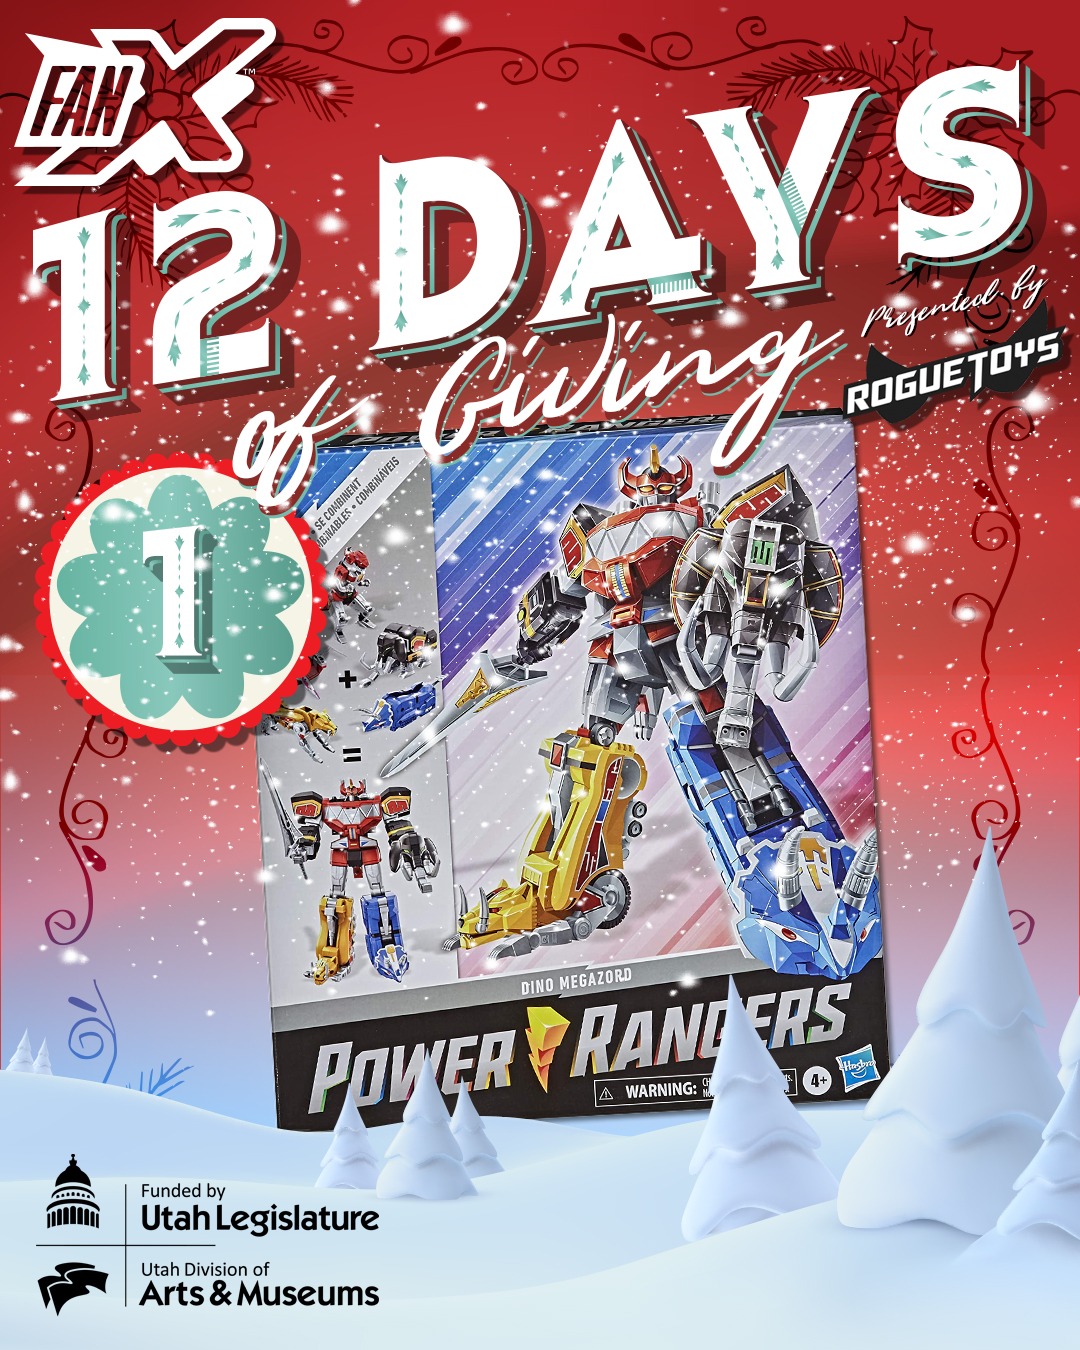 FanX 12 Days of Giving w/ local Businesses